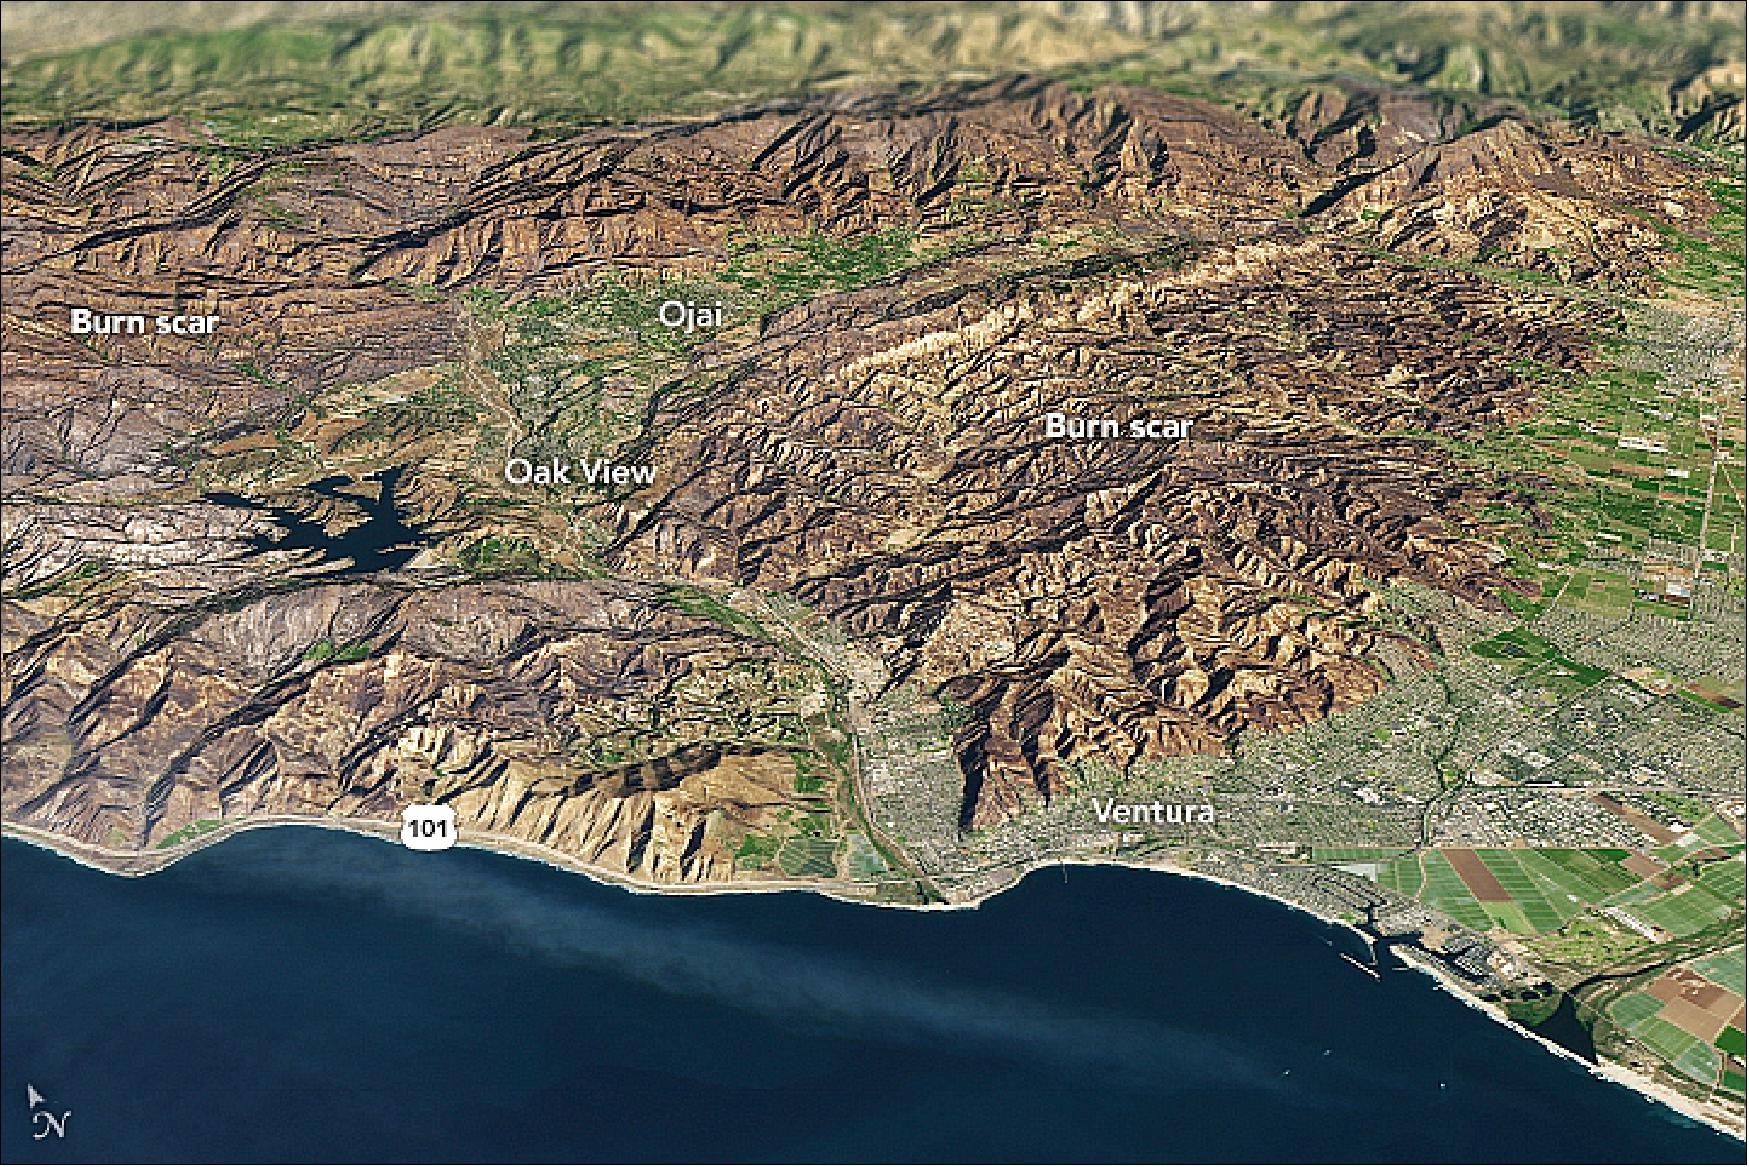 Figure 48: OLI on Landsat-8 captured an image of the Thomas fire scar on December 18, 2017. The natural-color Landsat-8 image was draped over an ASTER-derived Global Digital Elevation Model which shows the topography of the area (image credit: NASA Earth Observatory image by Joshua Stevens, using Landsat data from the USGS and ASTER GDEM data from NASA/GSFC/METI/ERSDAC/JAROS, and U.S./Japan ASTER Science Team, story by Adam Voiland)